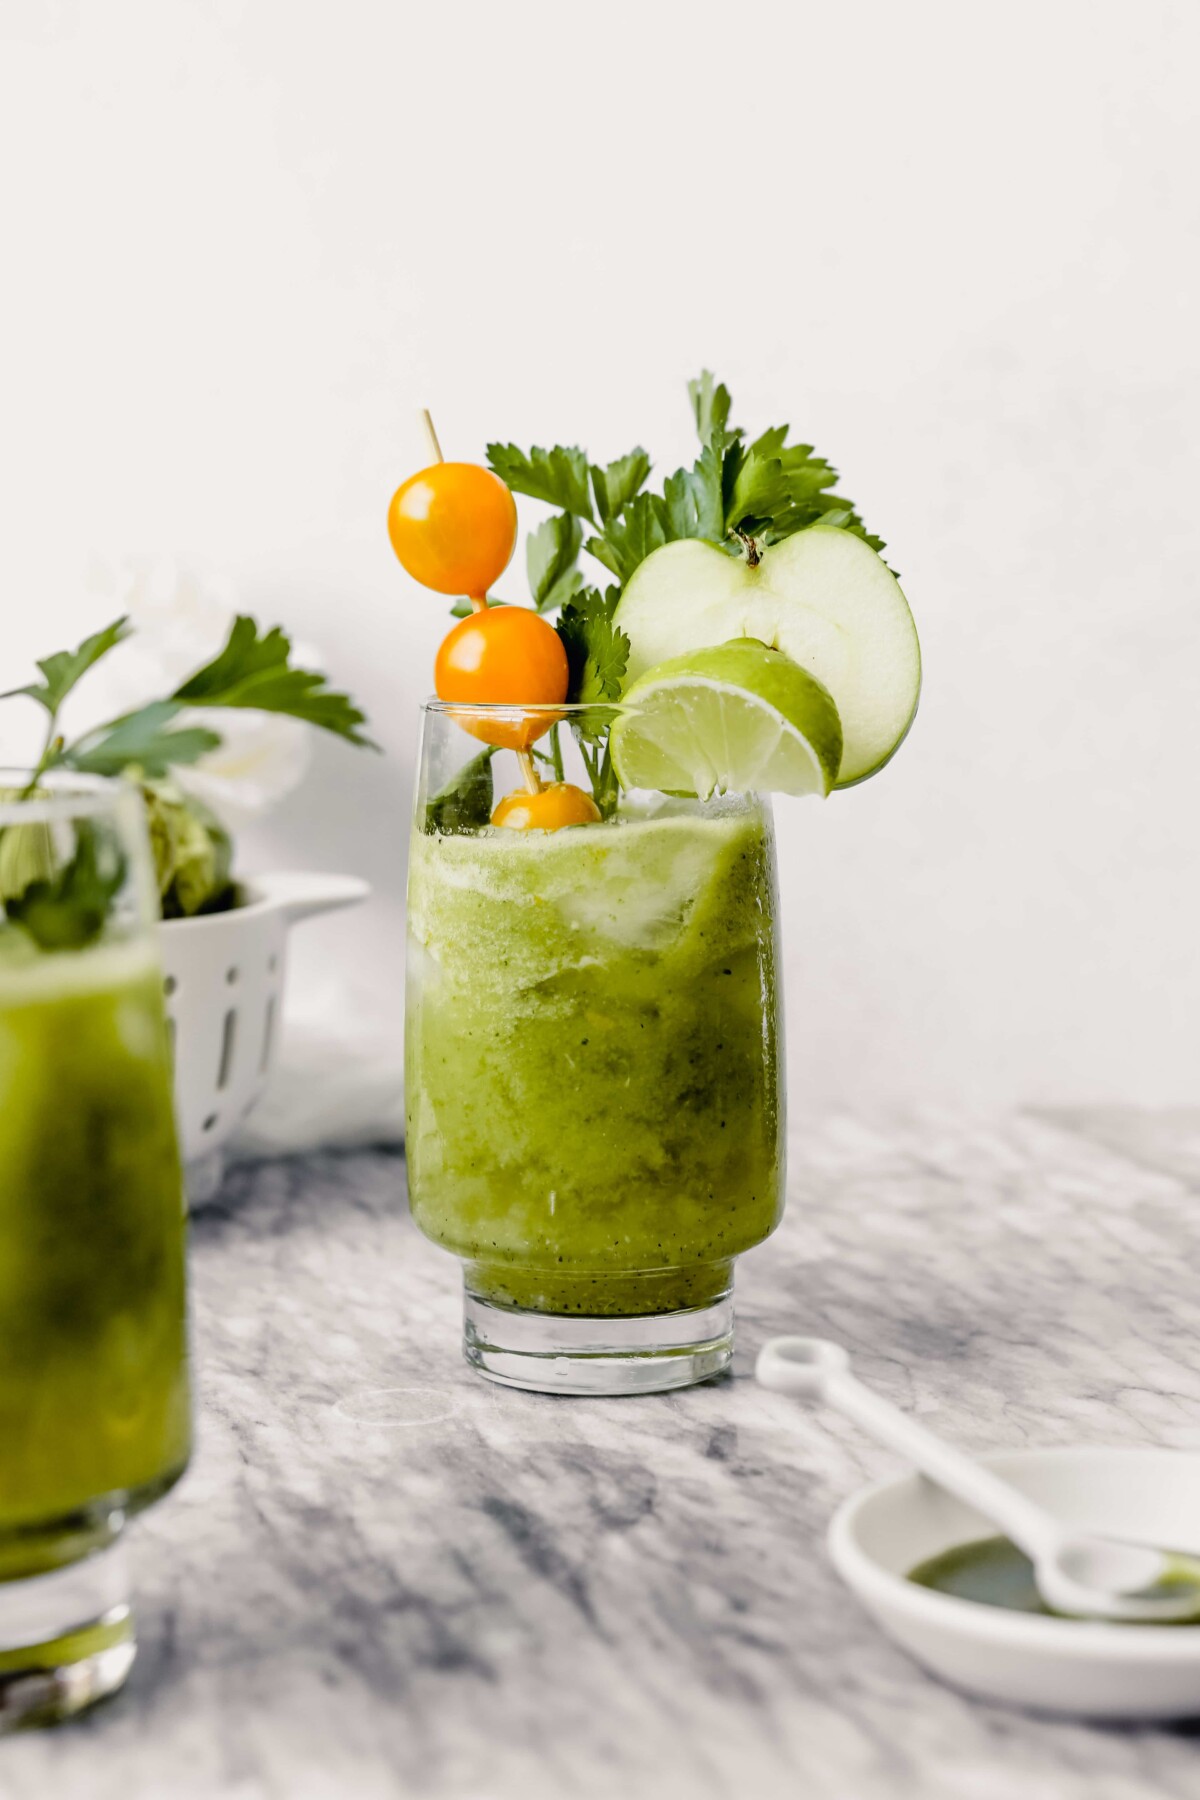 Photograph of green bloody mary in tall collins glass garnishes with yellow cherry tomatoes, herbs, lime wedge and apple slice. 